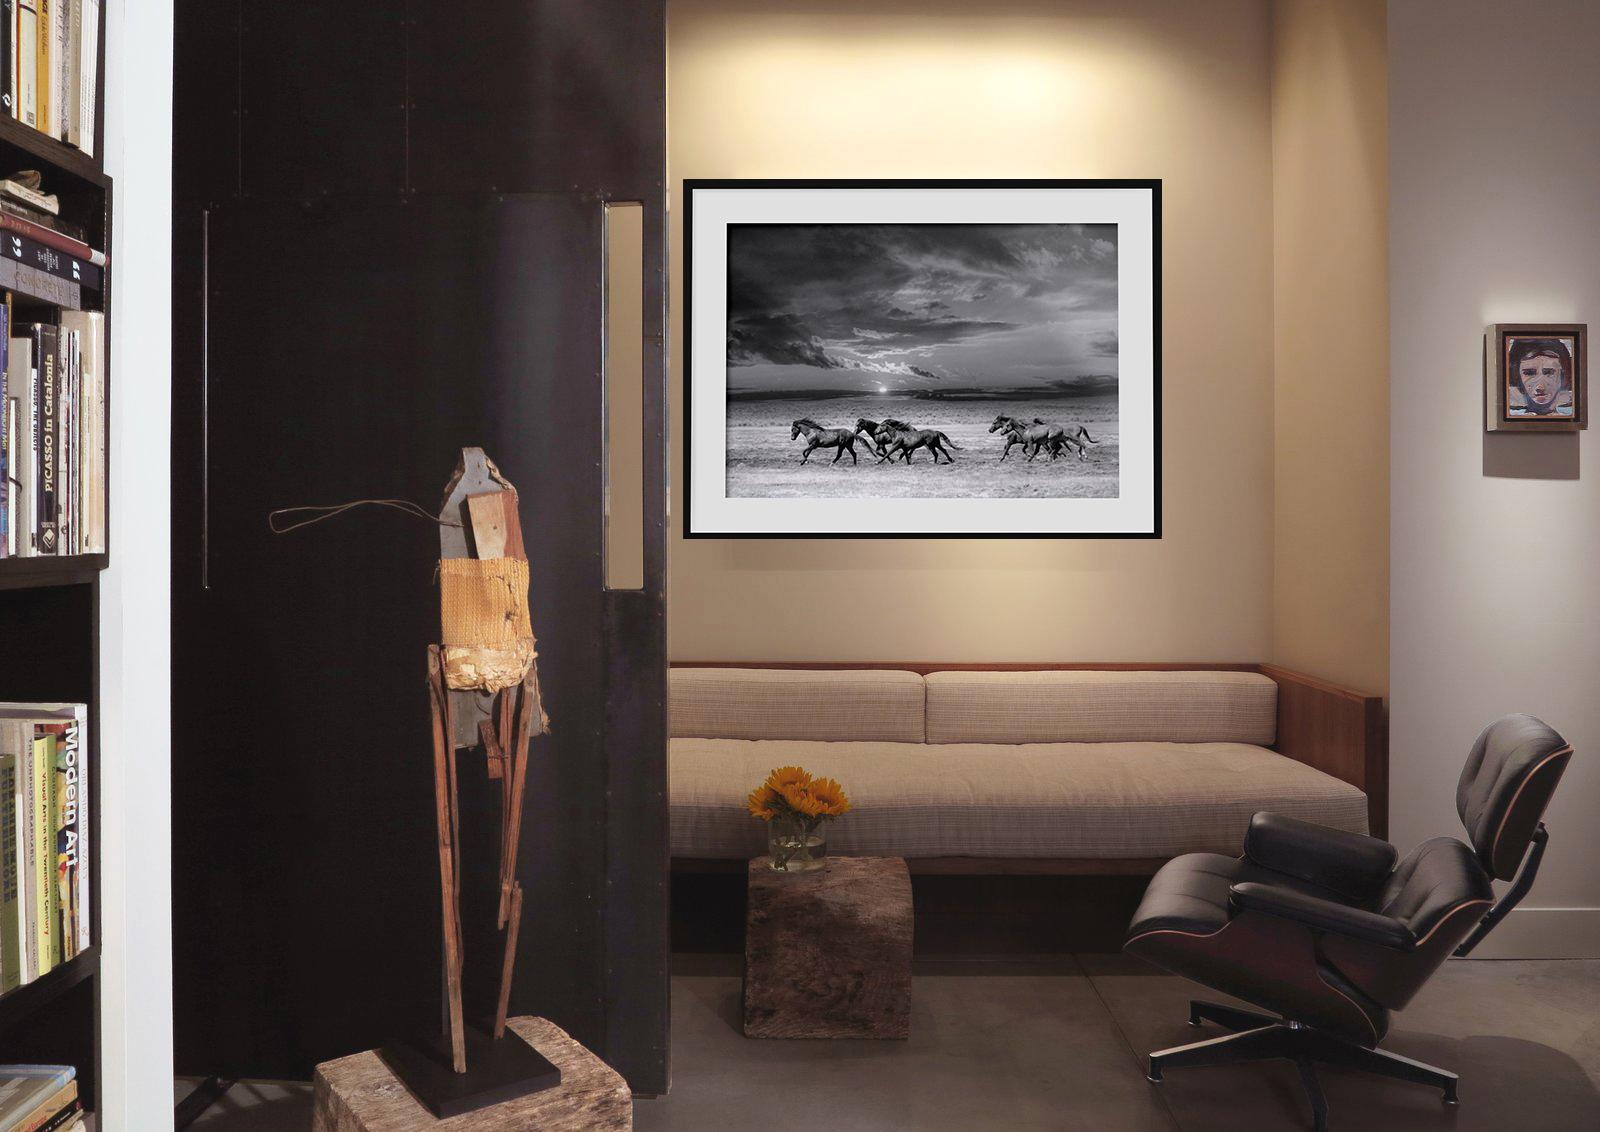 Chasing the Light- 60x40 Black & White Photography Wild Horses Mustangs Unsigned - Print by Shane Russeck